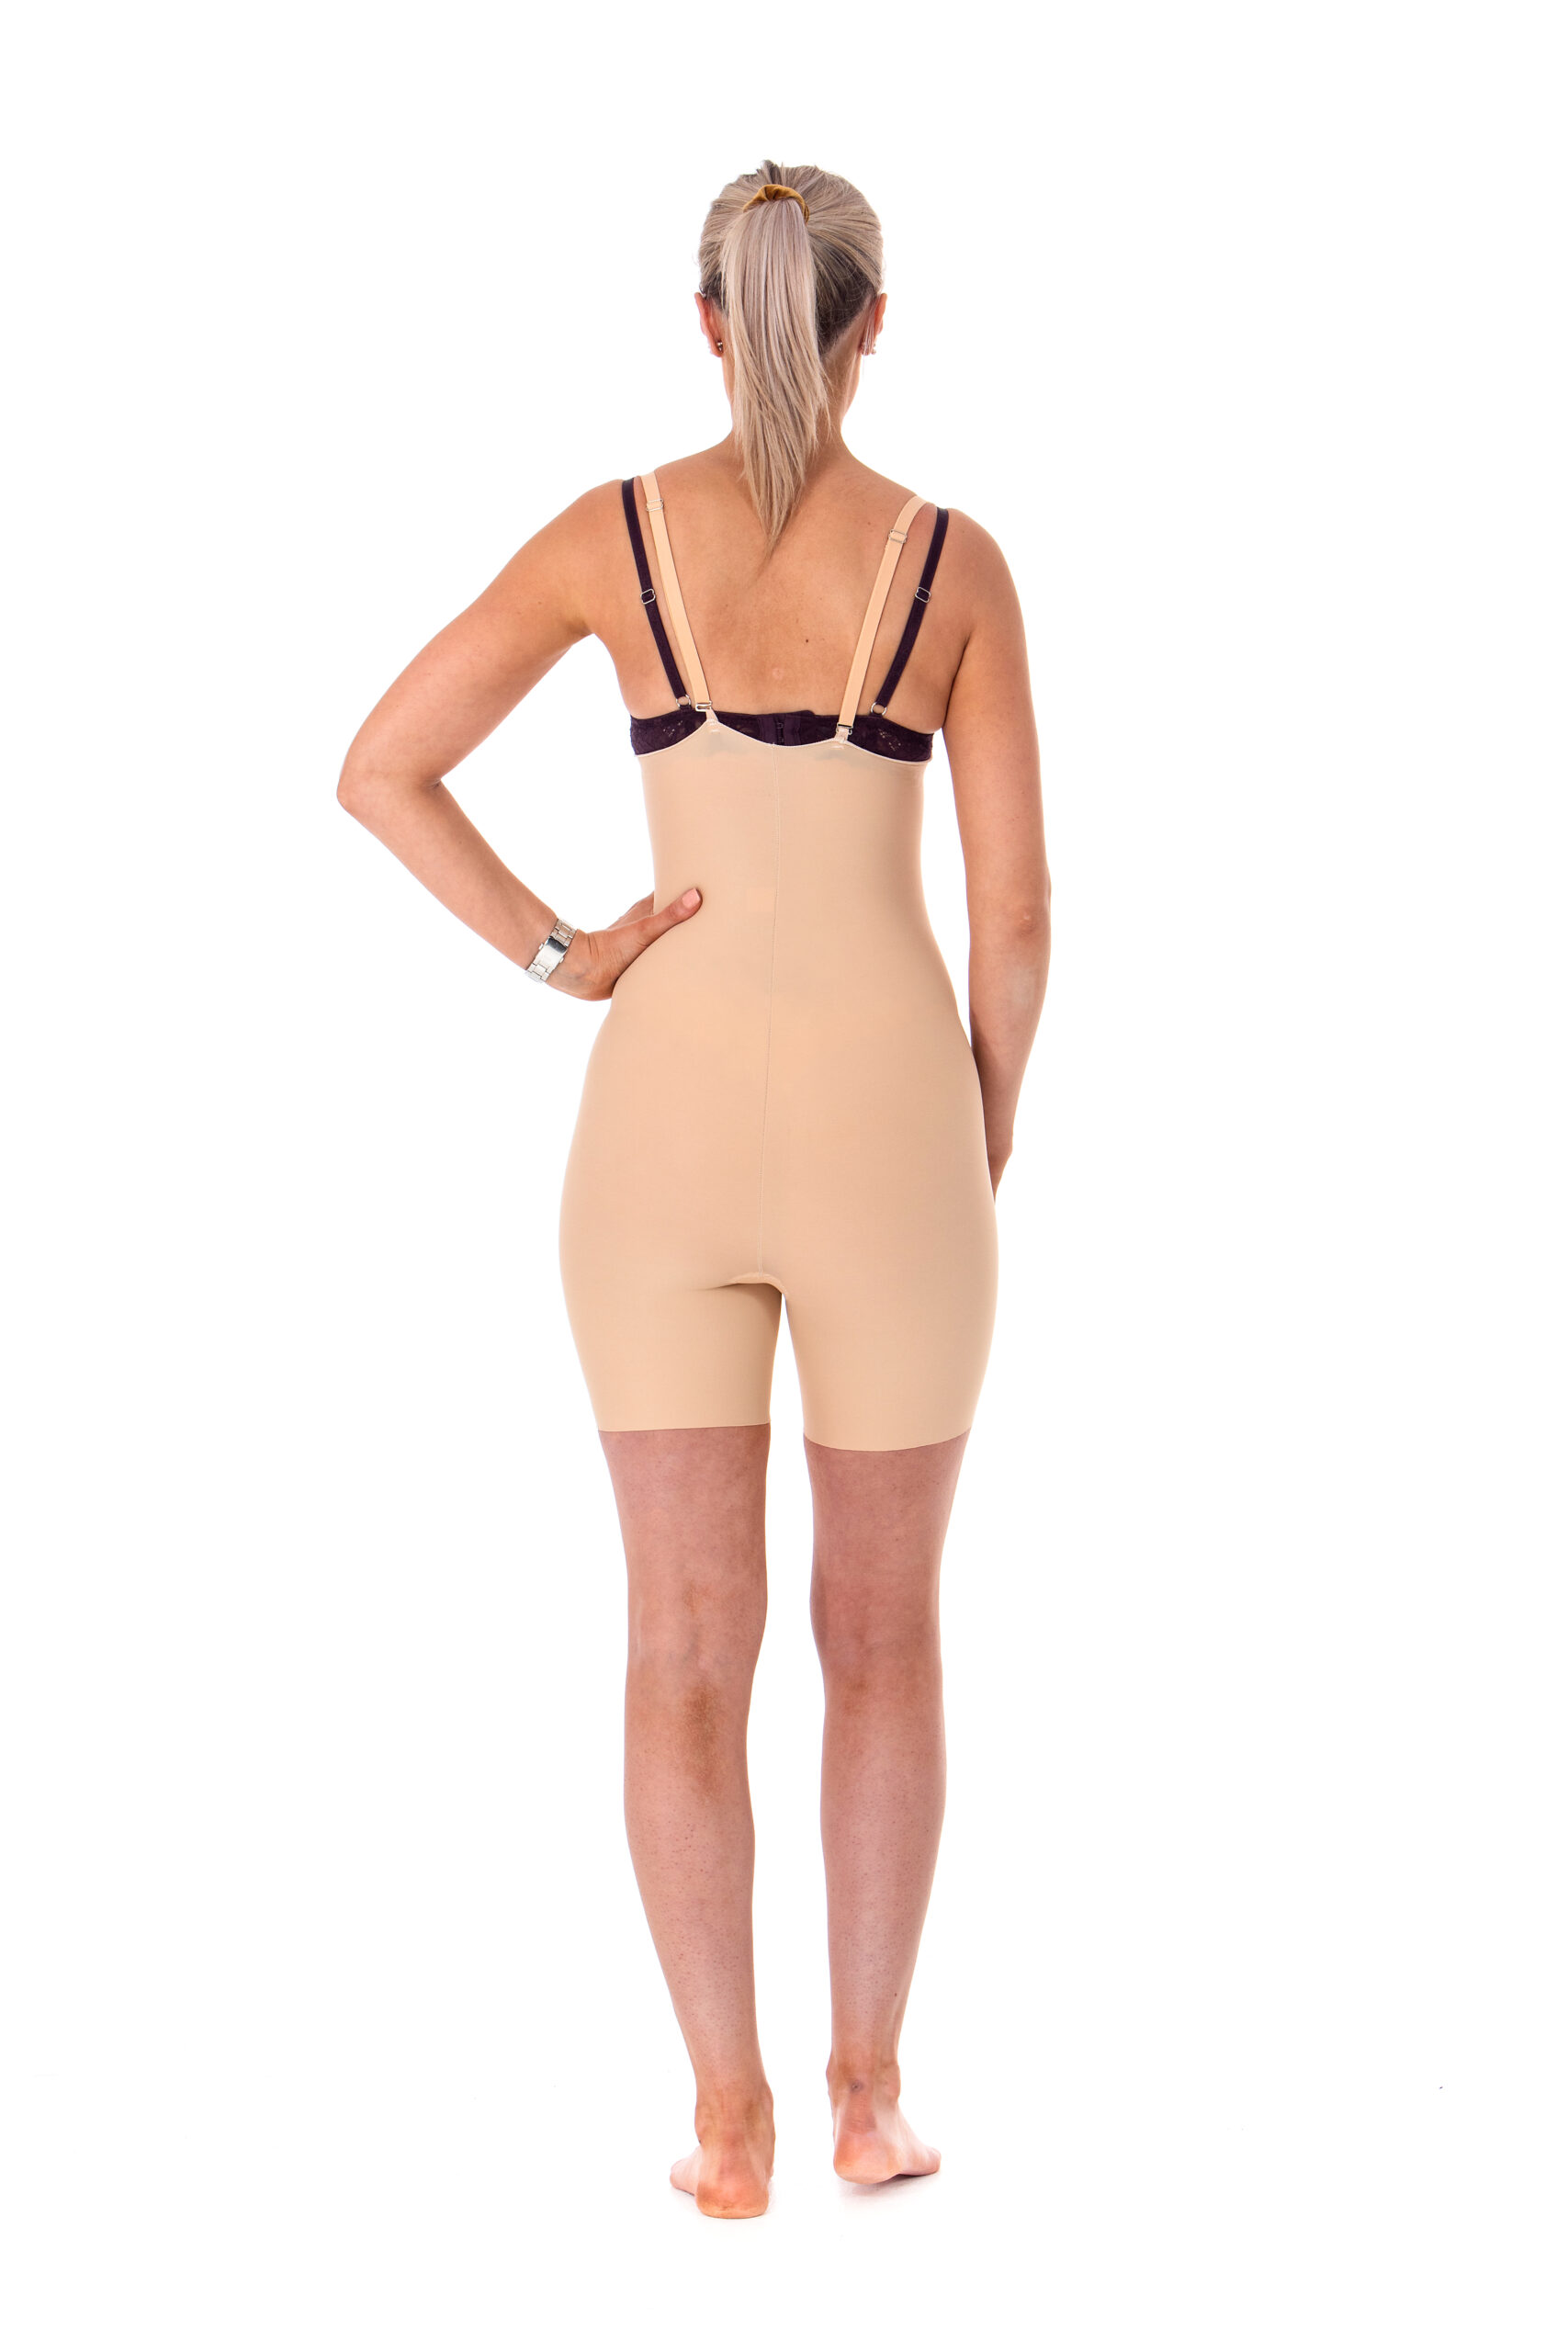 ATIR Shapewear - The ATIR Toner -Before and After and the Toner